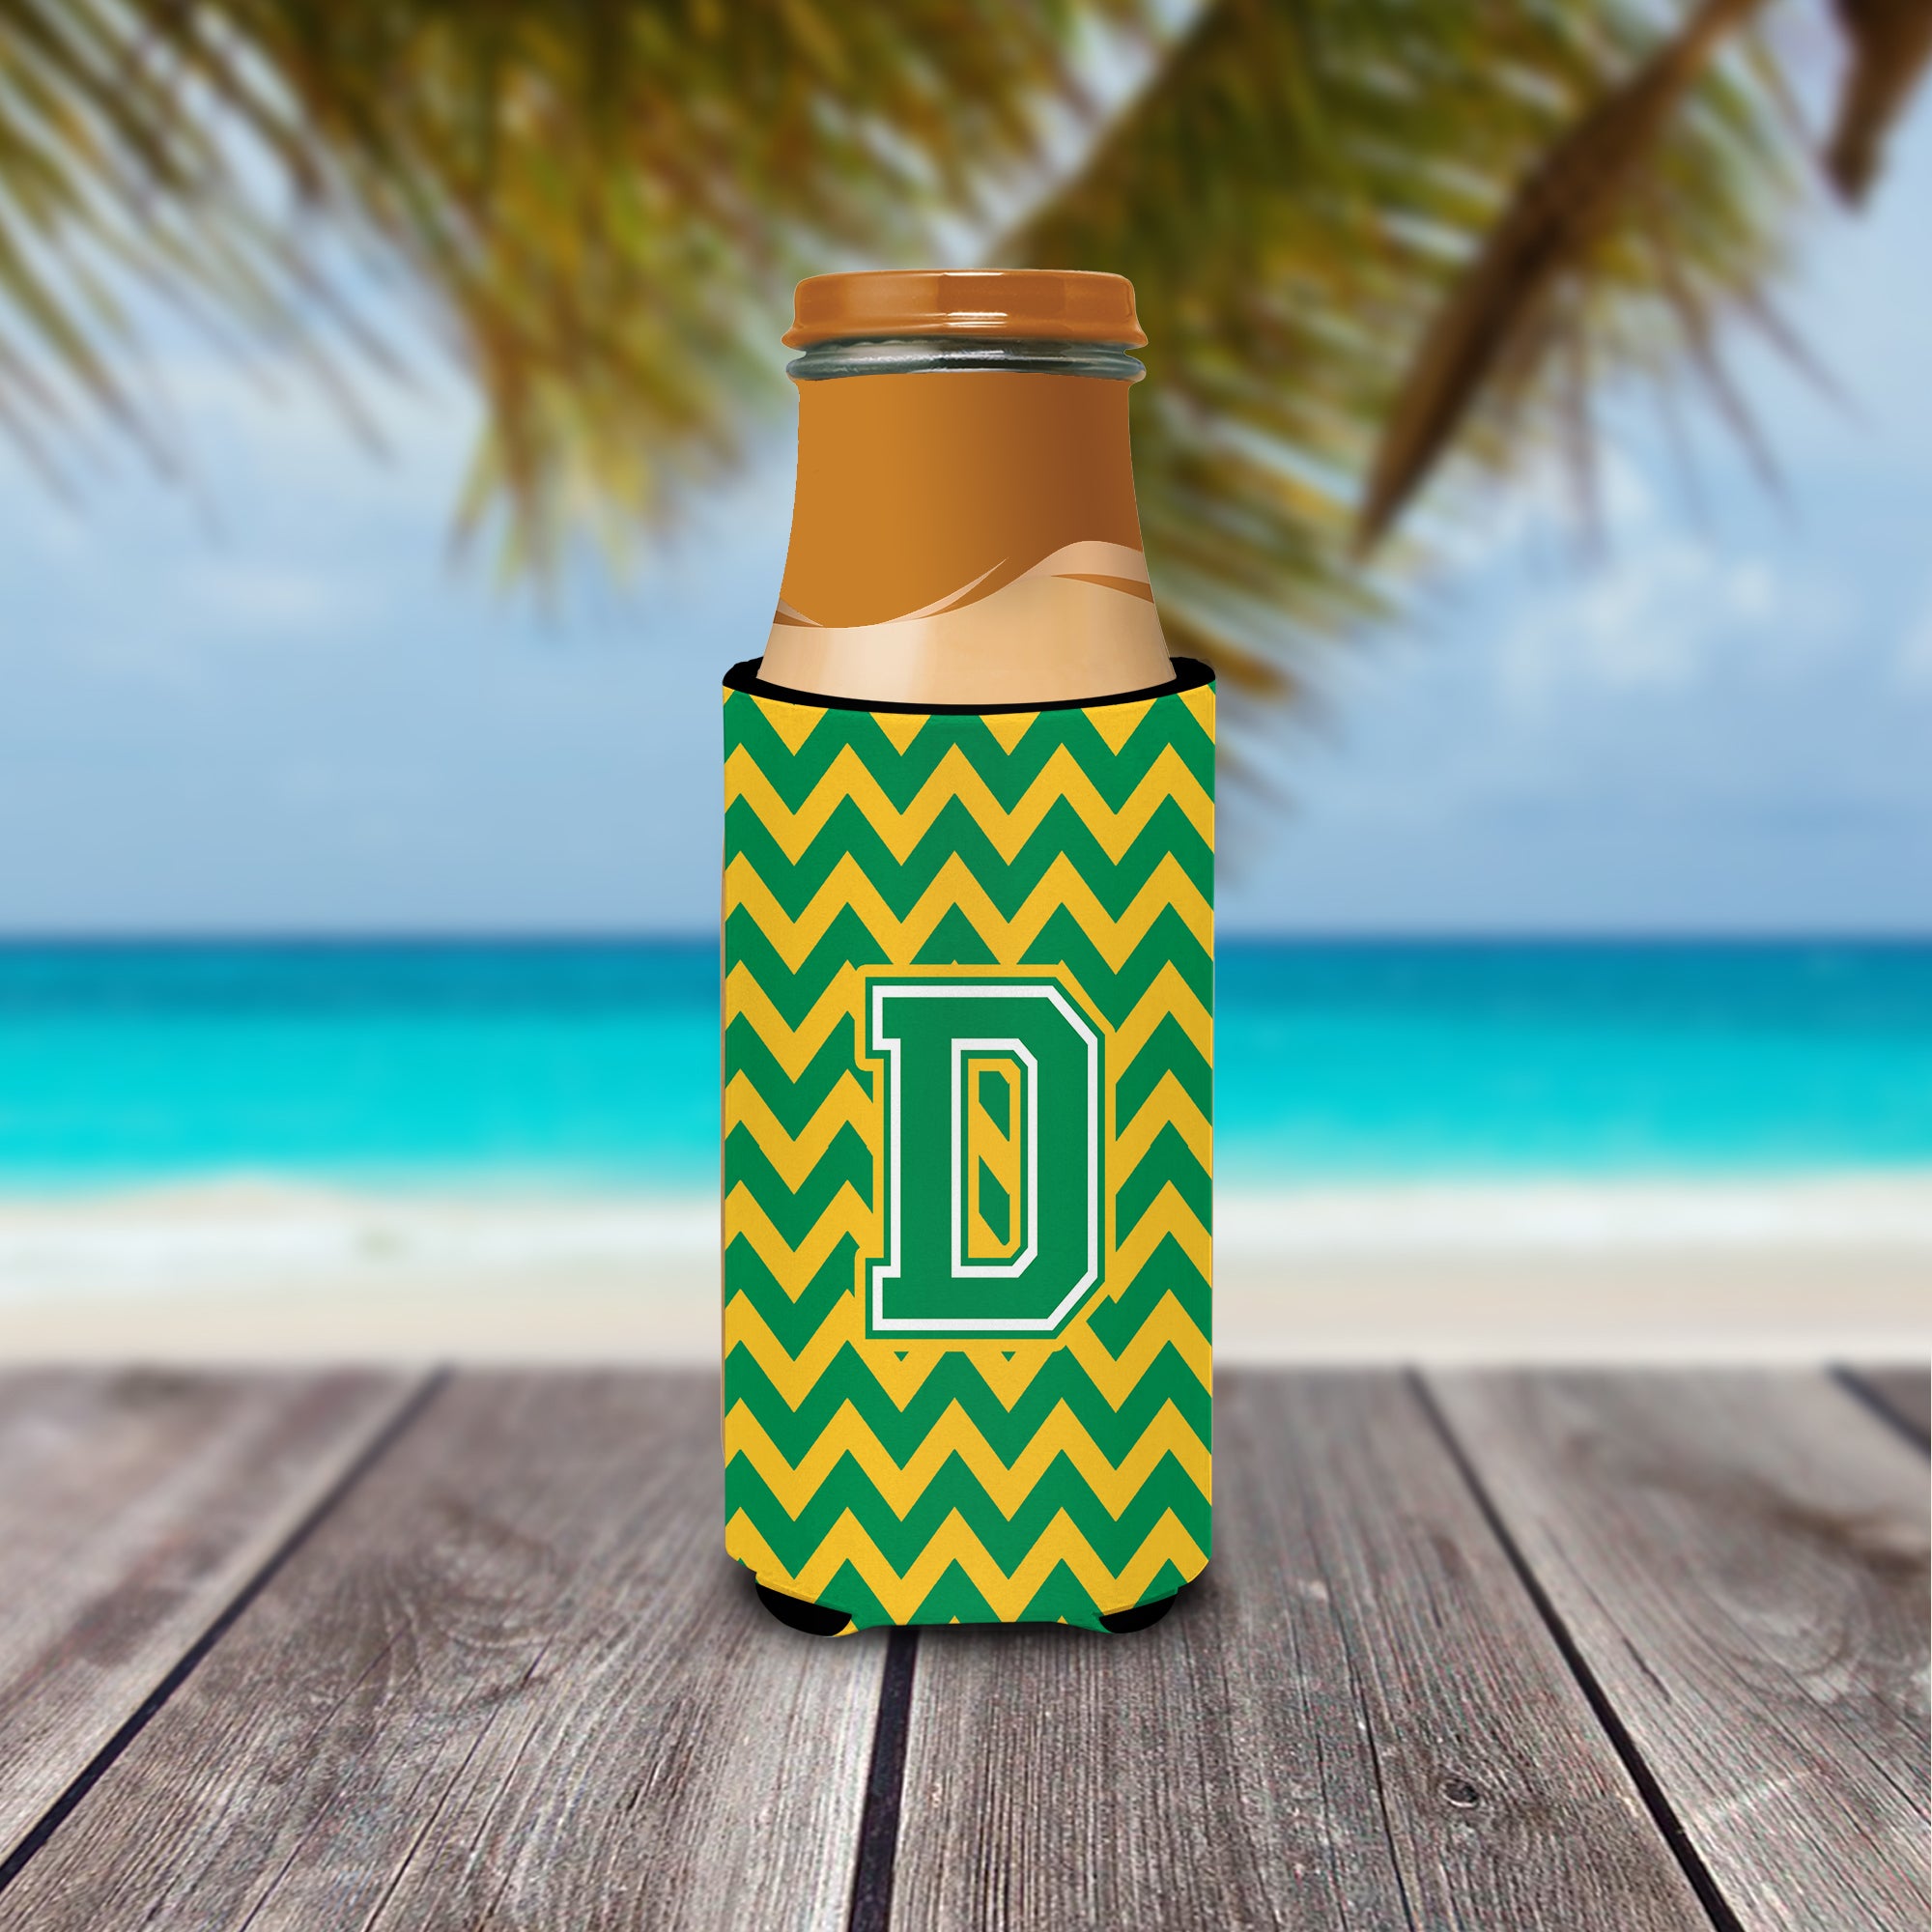 Letter D Chevron Green and Gold Ultra Beverage Insulators for slim cans CJ1059-DMUK.